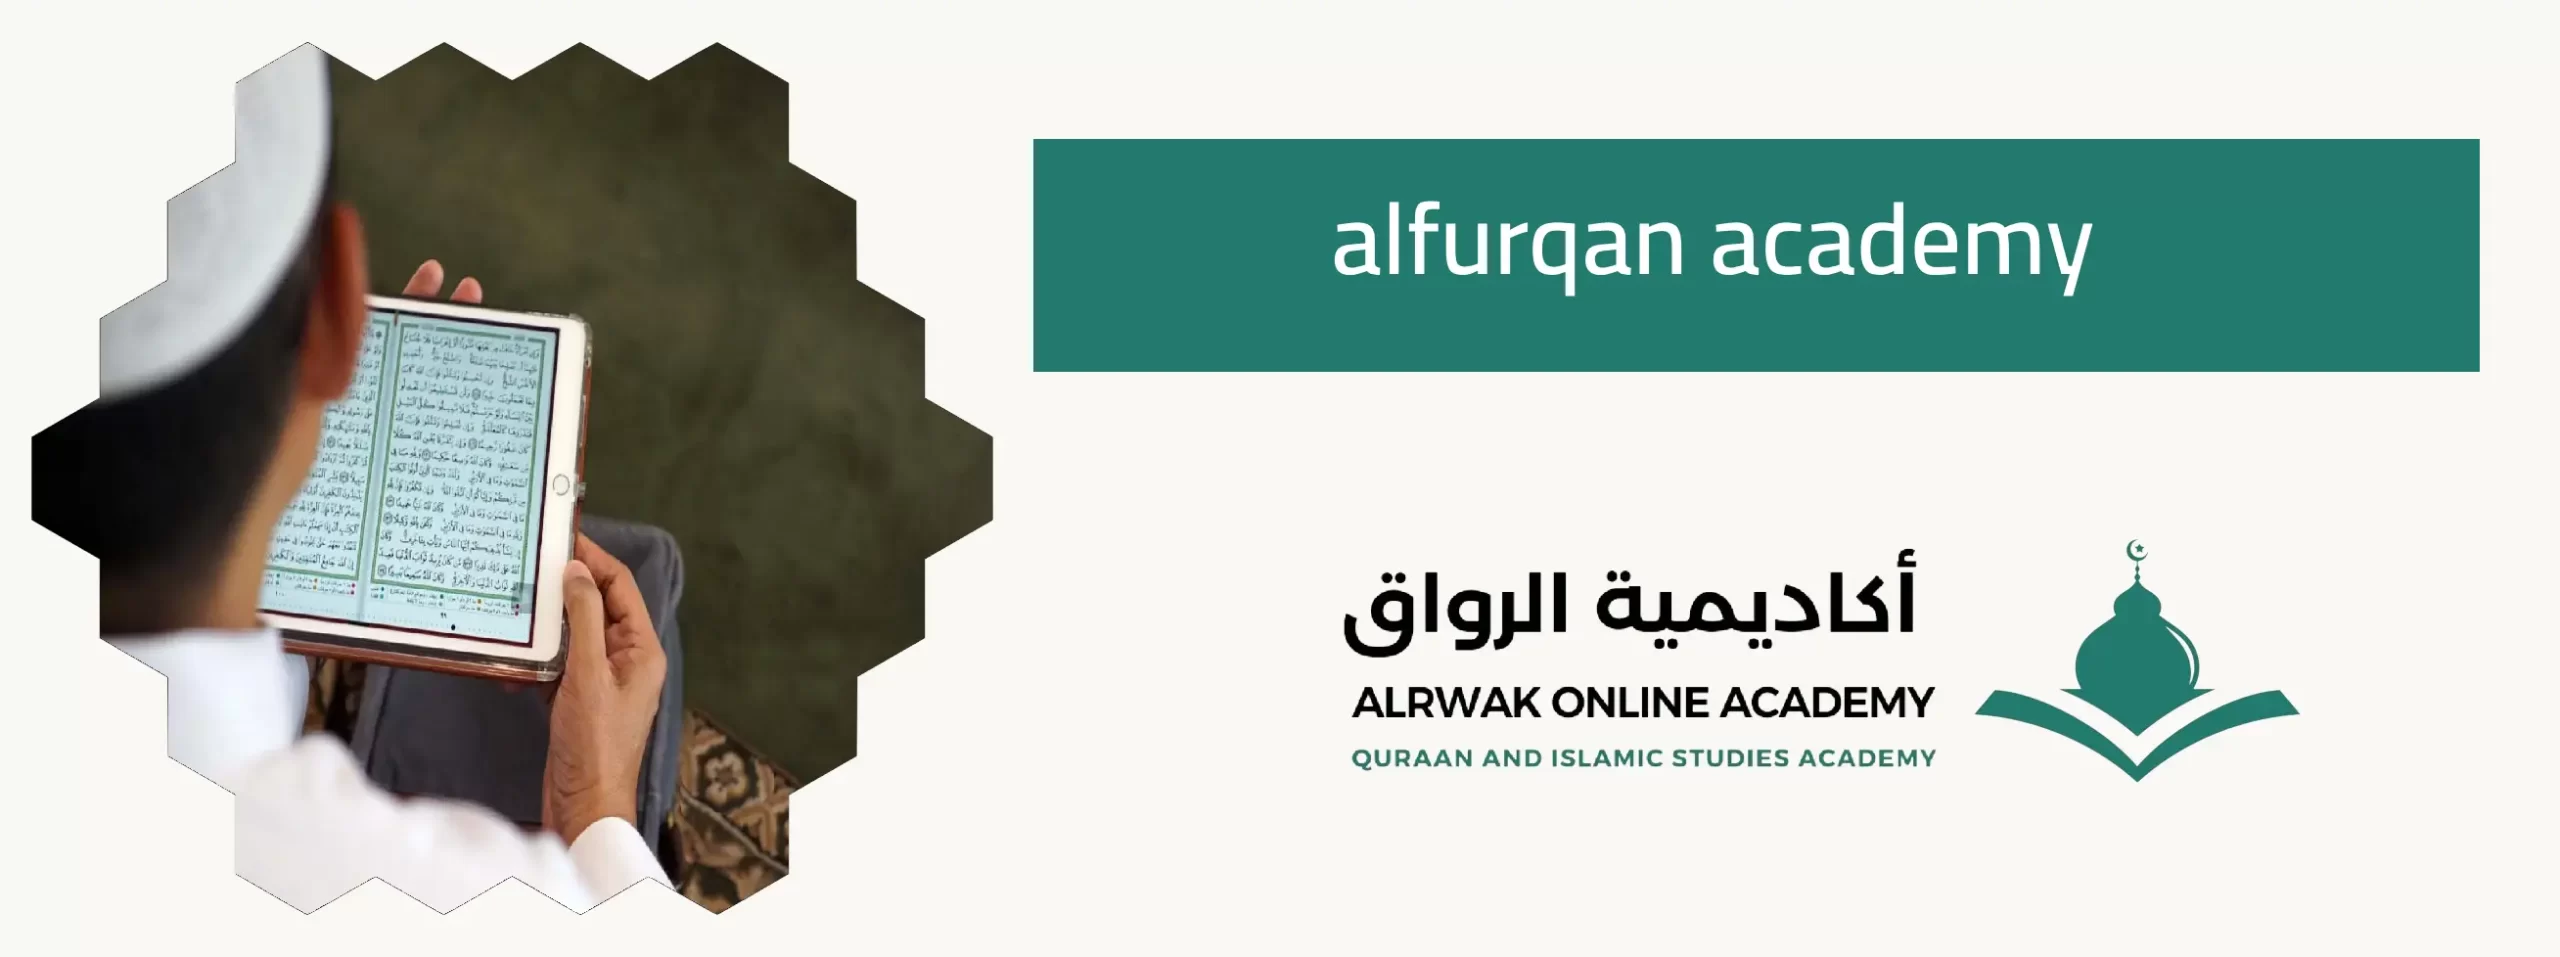 Online Quran classes for adults